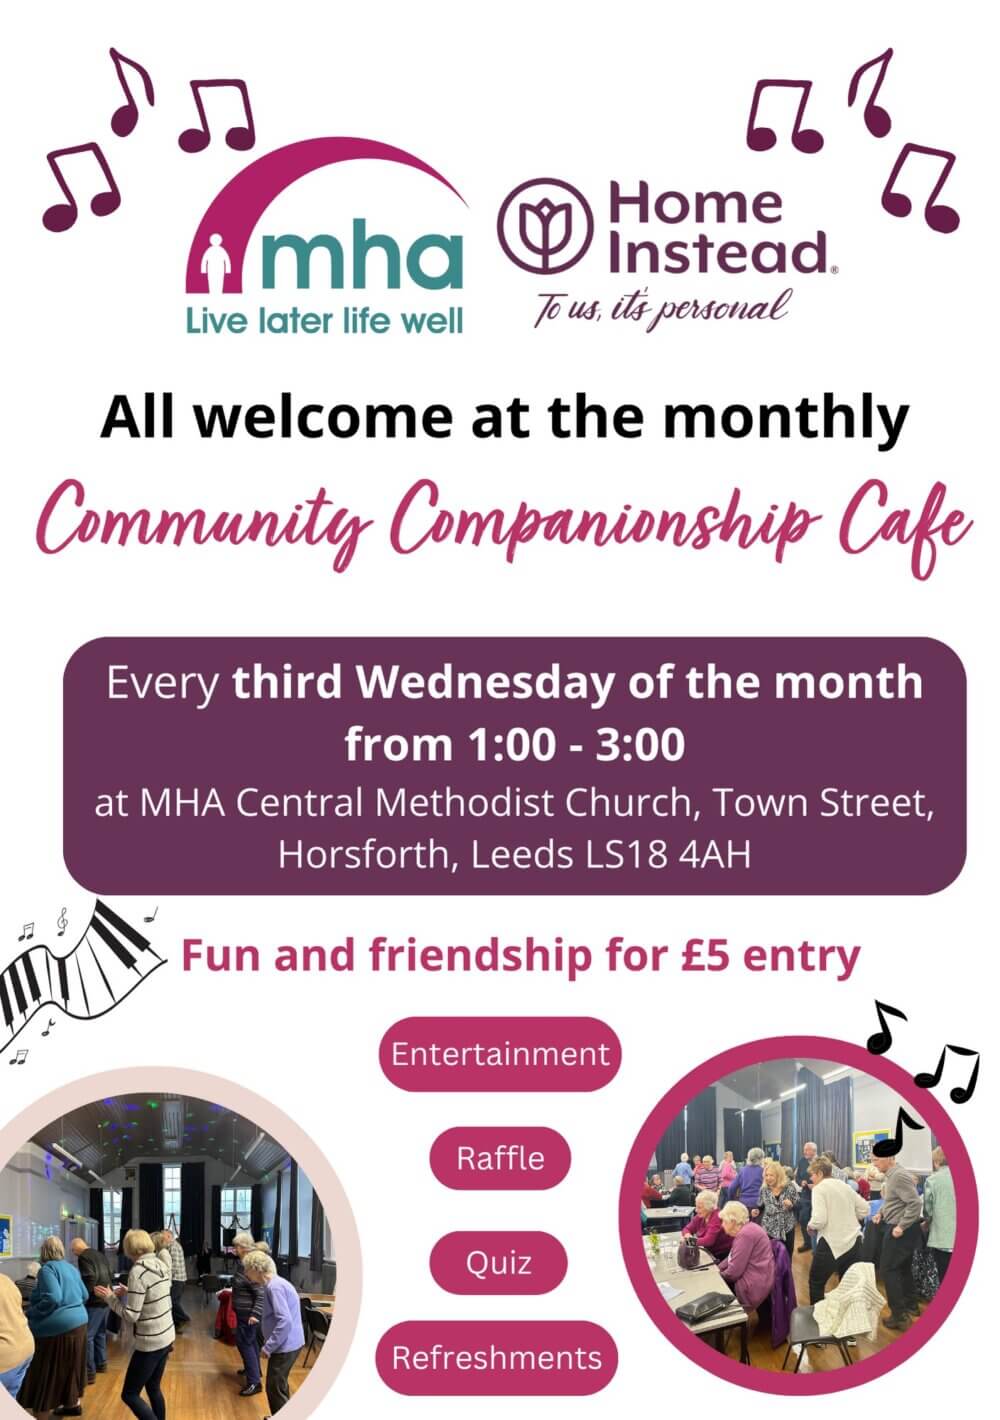 MHA organisation Horsforth activity with Home Instead